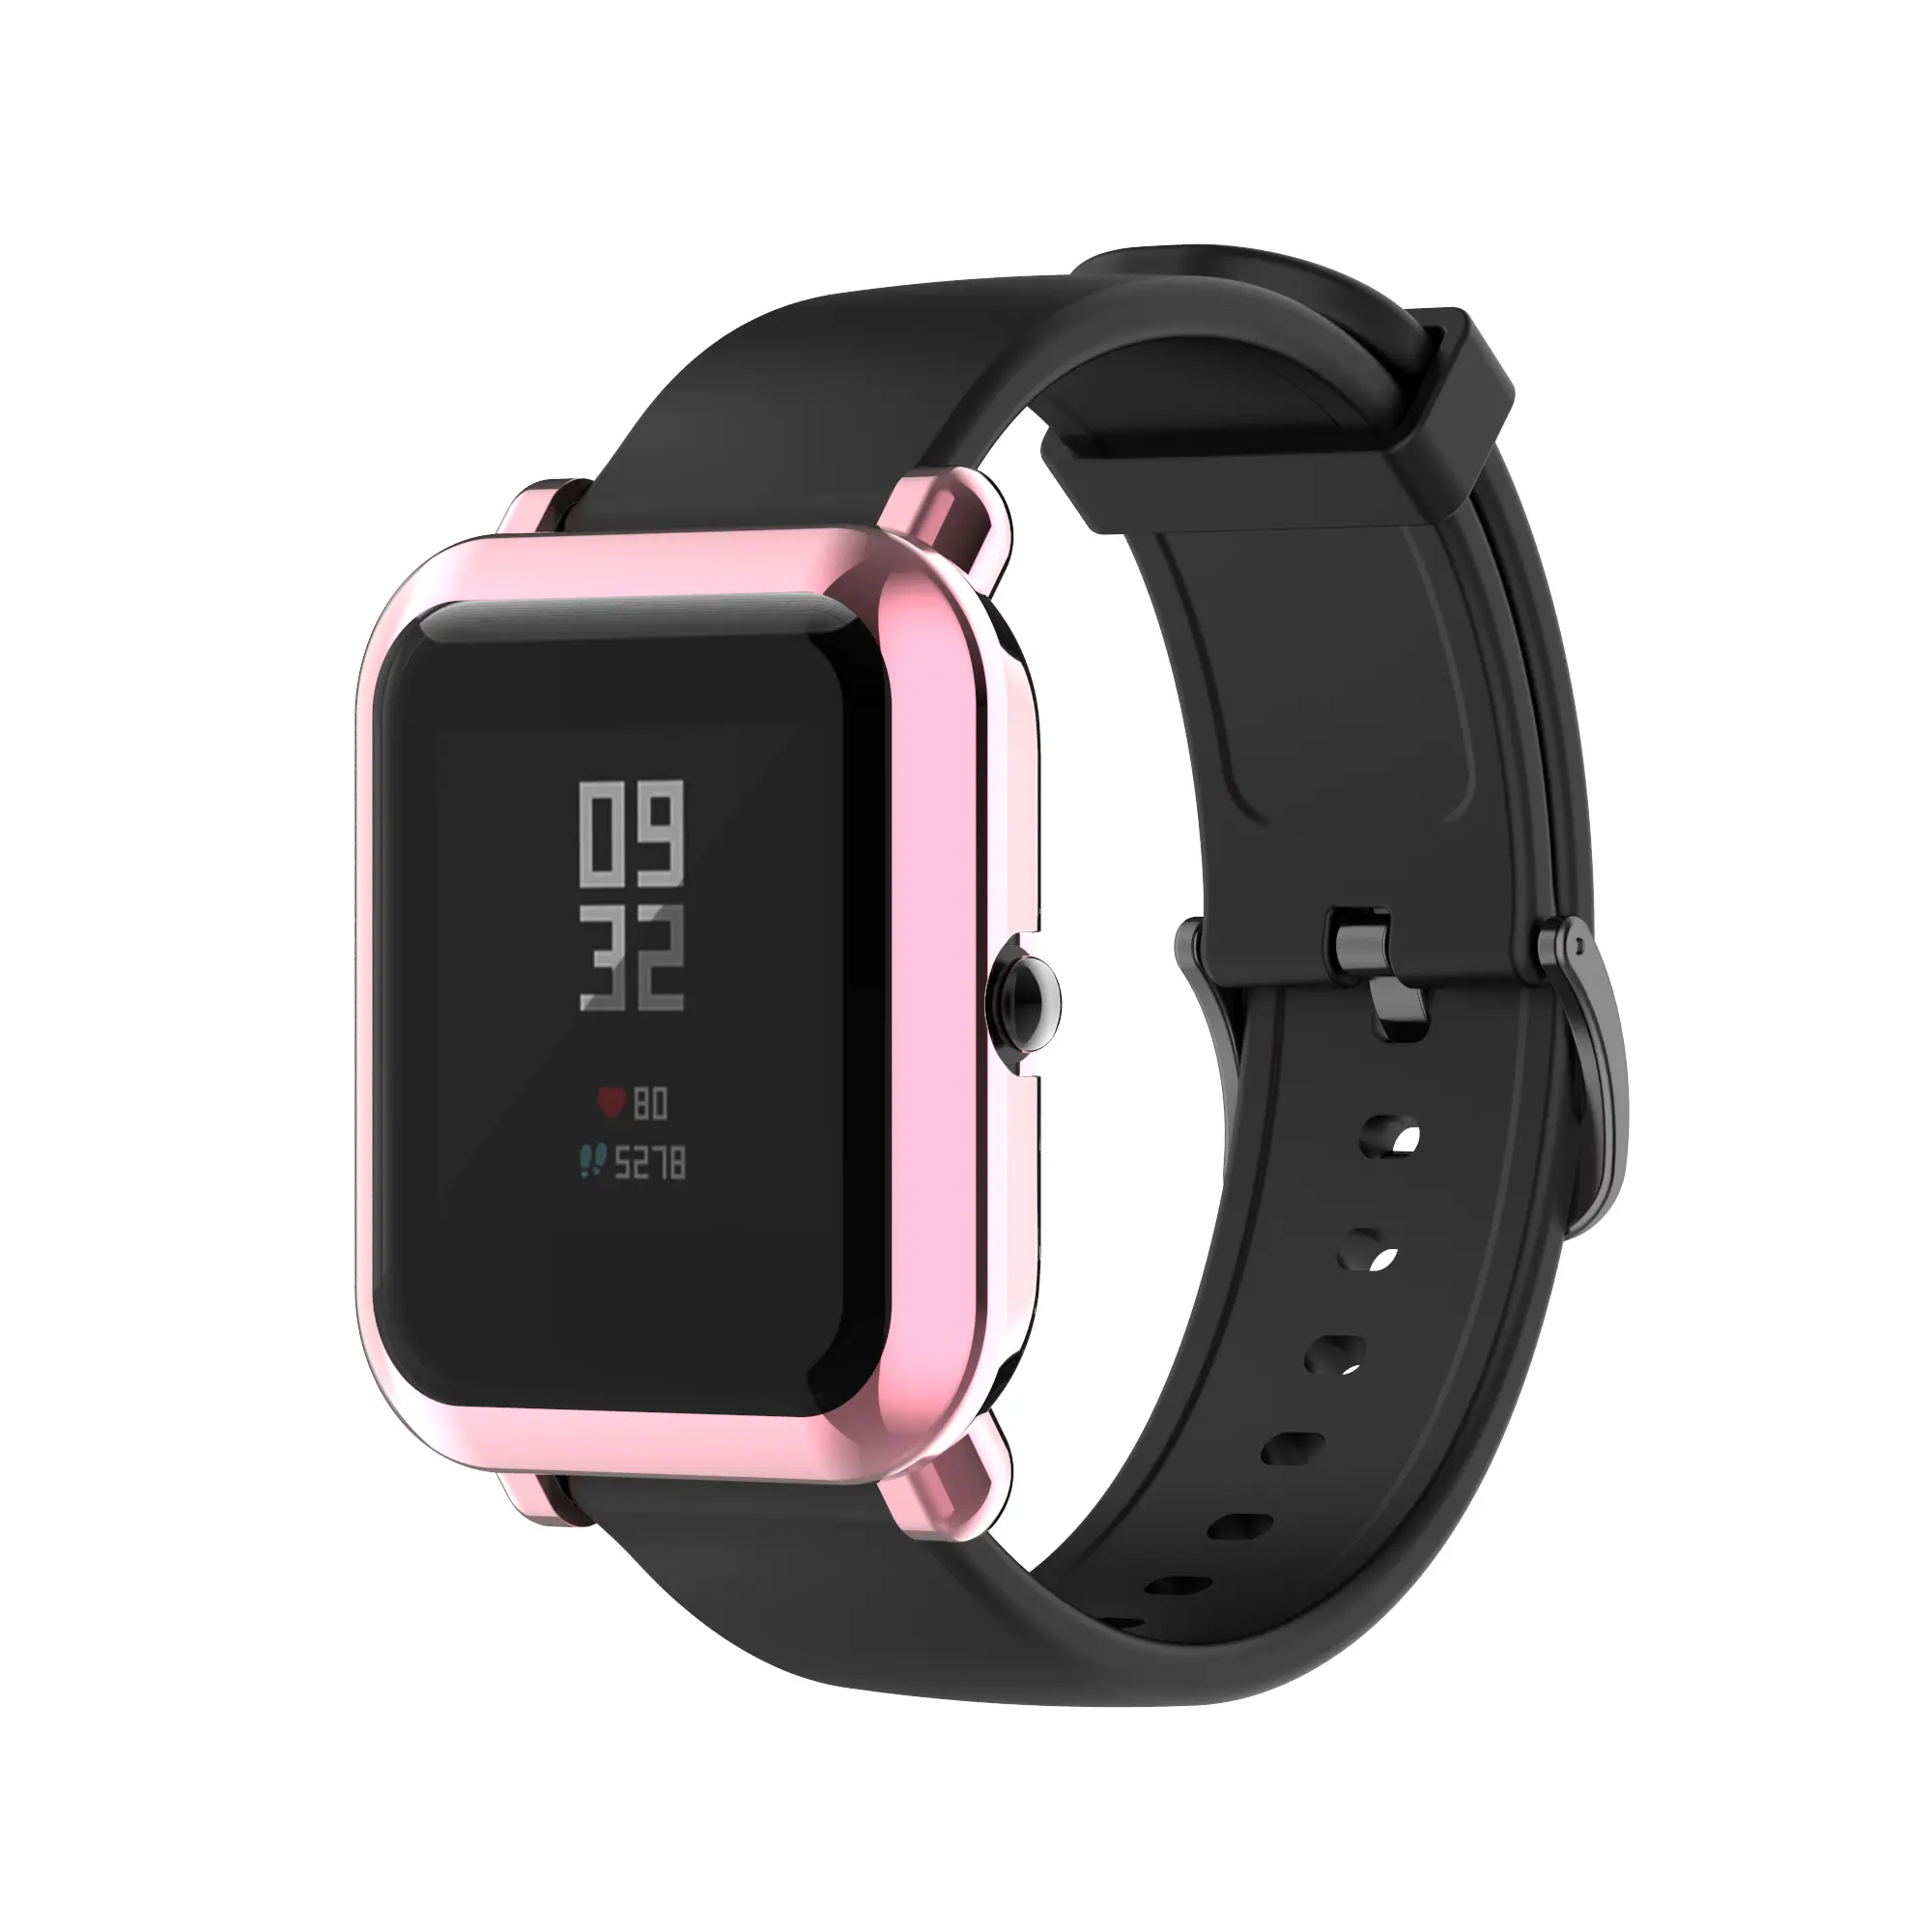 Screen Protector Case For Xiaomi Huami Amazfit GTS 2 mini Watch Colorful Protector TPU Case Cover For Amazfit GTS2 mini Cases